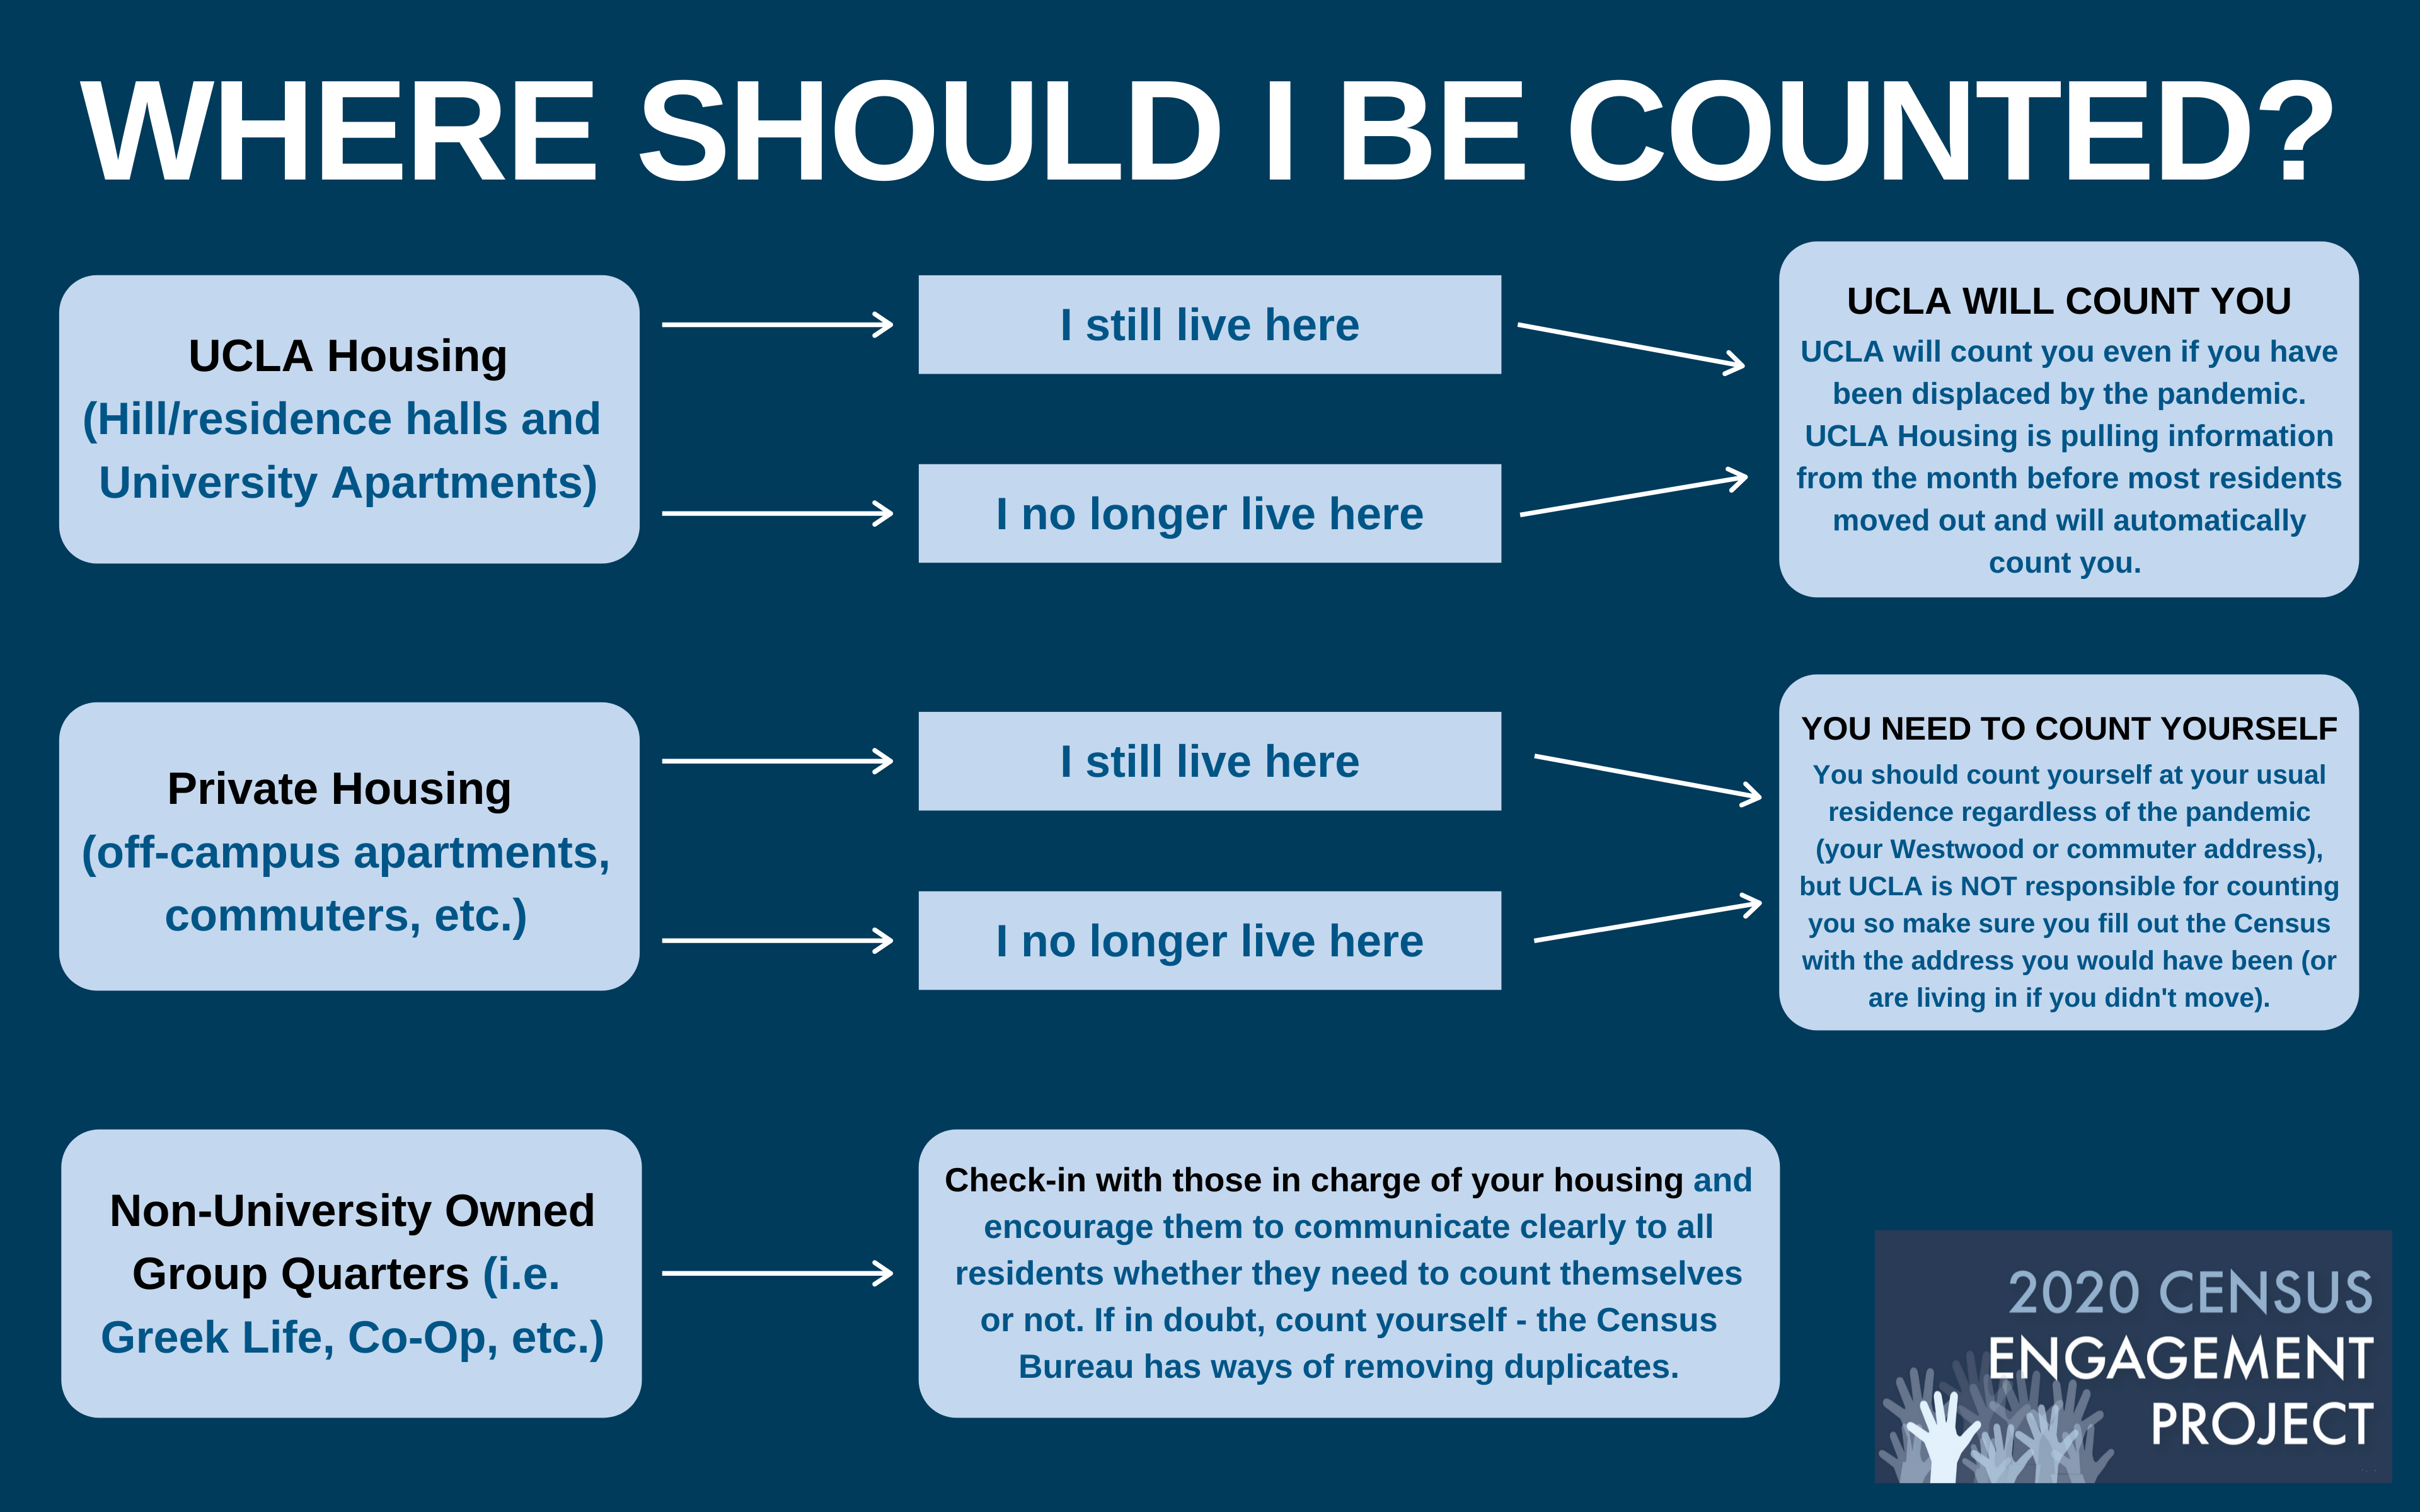 If you live in or lived in UCLA Housing before the pandemic, including both the Hill/residence halls and University Apartments), UCLA will count you even if you have been displaced by the pandemic. UCLA Housing is pulling information from the month before most residents moved out and will automatically count you. If you live in or lived in private housing (i.e. off-campus apartments, commuters, etc.), you need to count yourself and should count yourself at your usual residence regardless of the pandemic (your Westwood or commuter address), but UCLA is not responsible for counting you, so make sure you fill out the Census with the address you would have been (or are living in if you didn't move). If you live in or lived in non-university owned group quarters (i.e. Greek Life, co-op, etc.), check-in with those in charge of your housing and encourage them to communicate clearly to all residents whether they need to count themselves or not. If in doubt, count yourself - the Census Bureau has ways of removing duplicates.